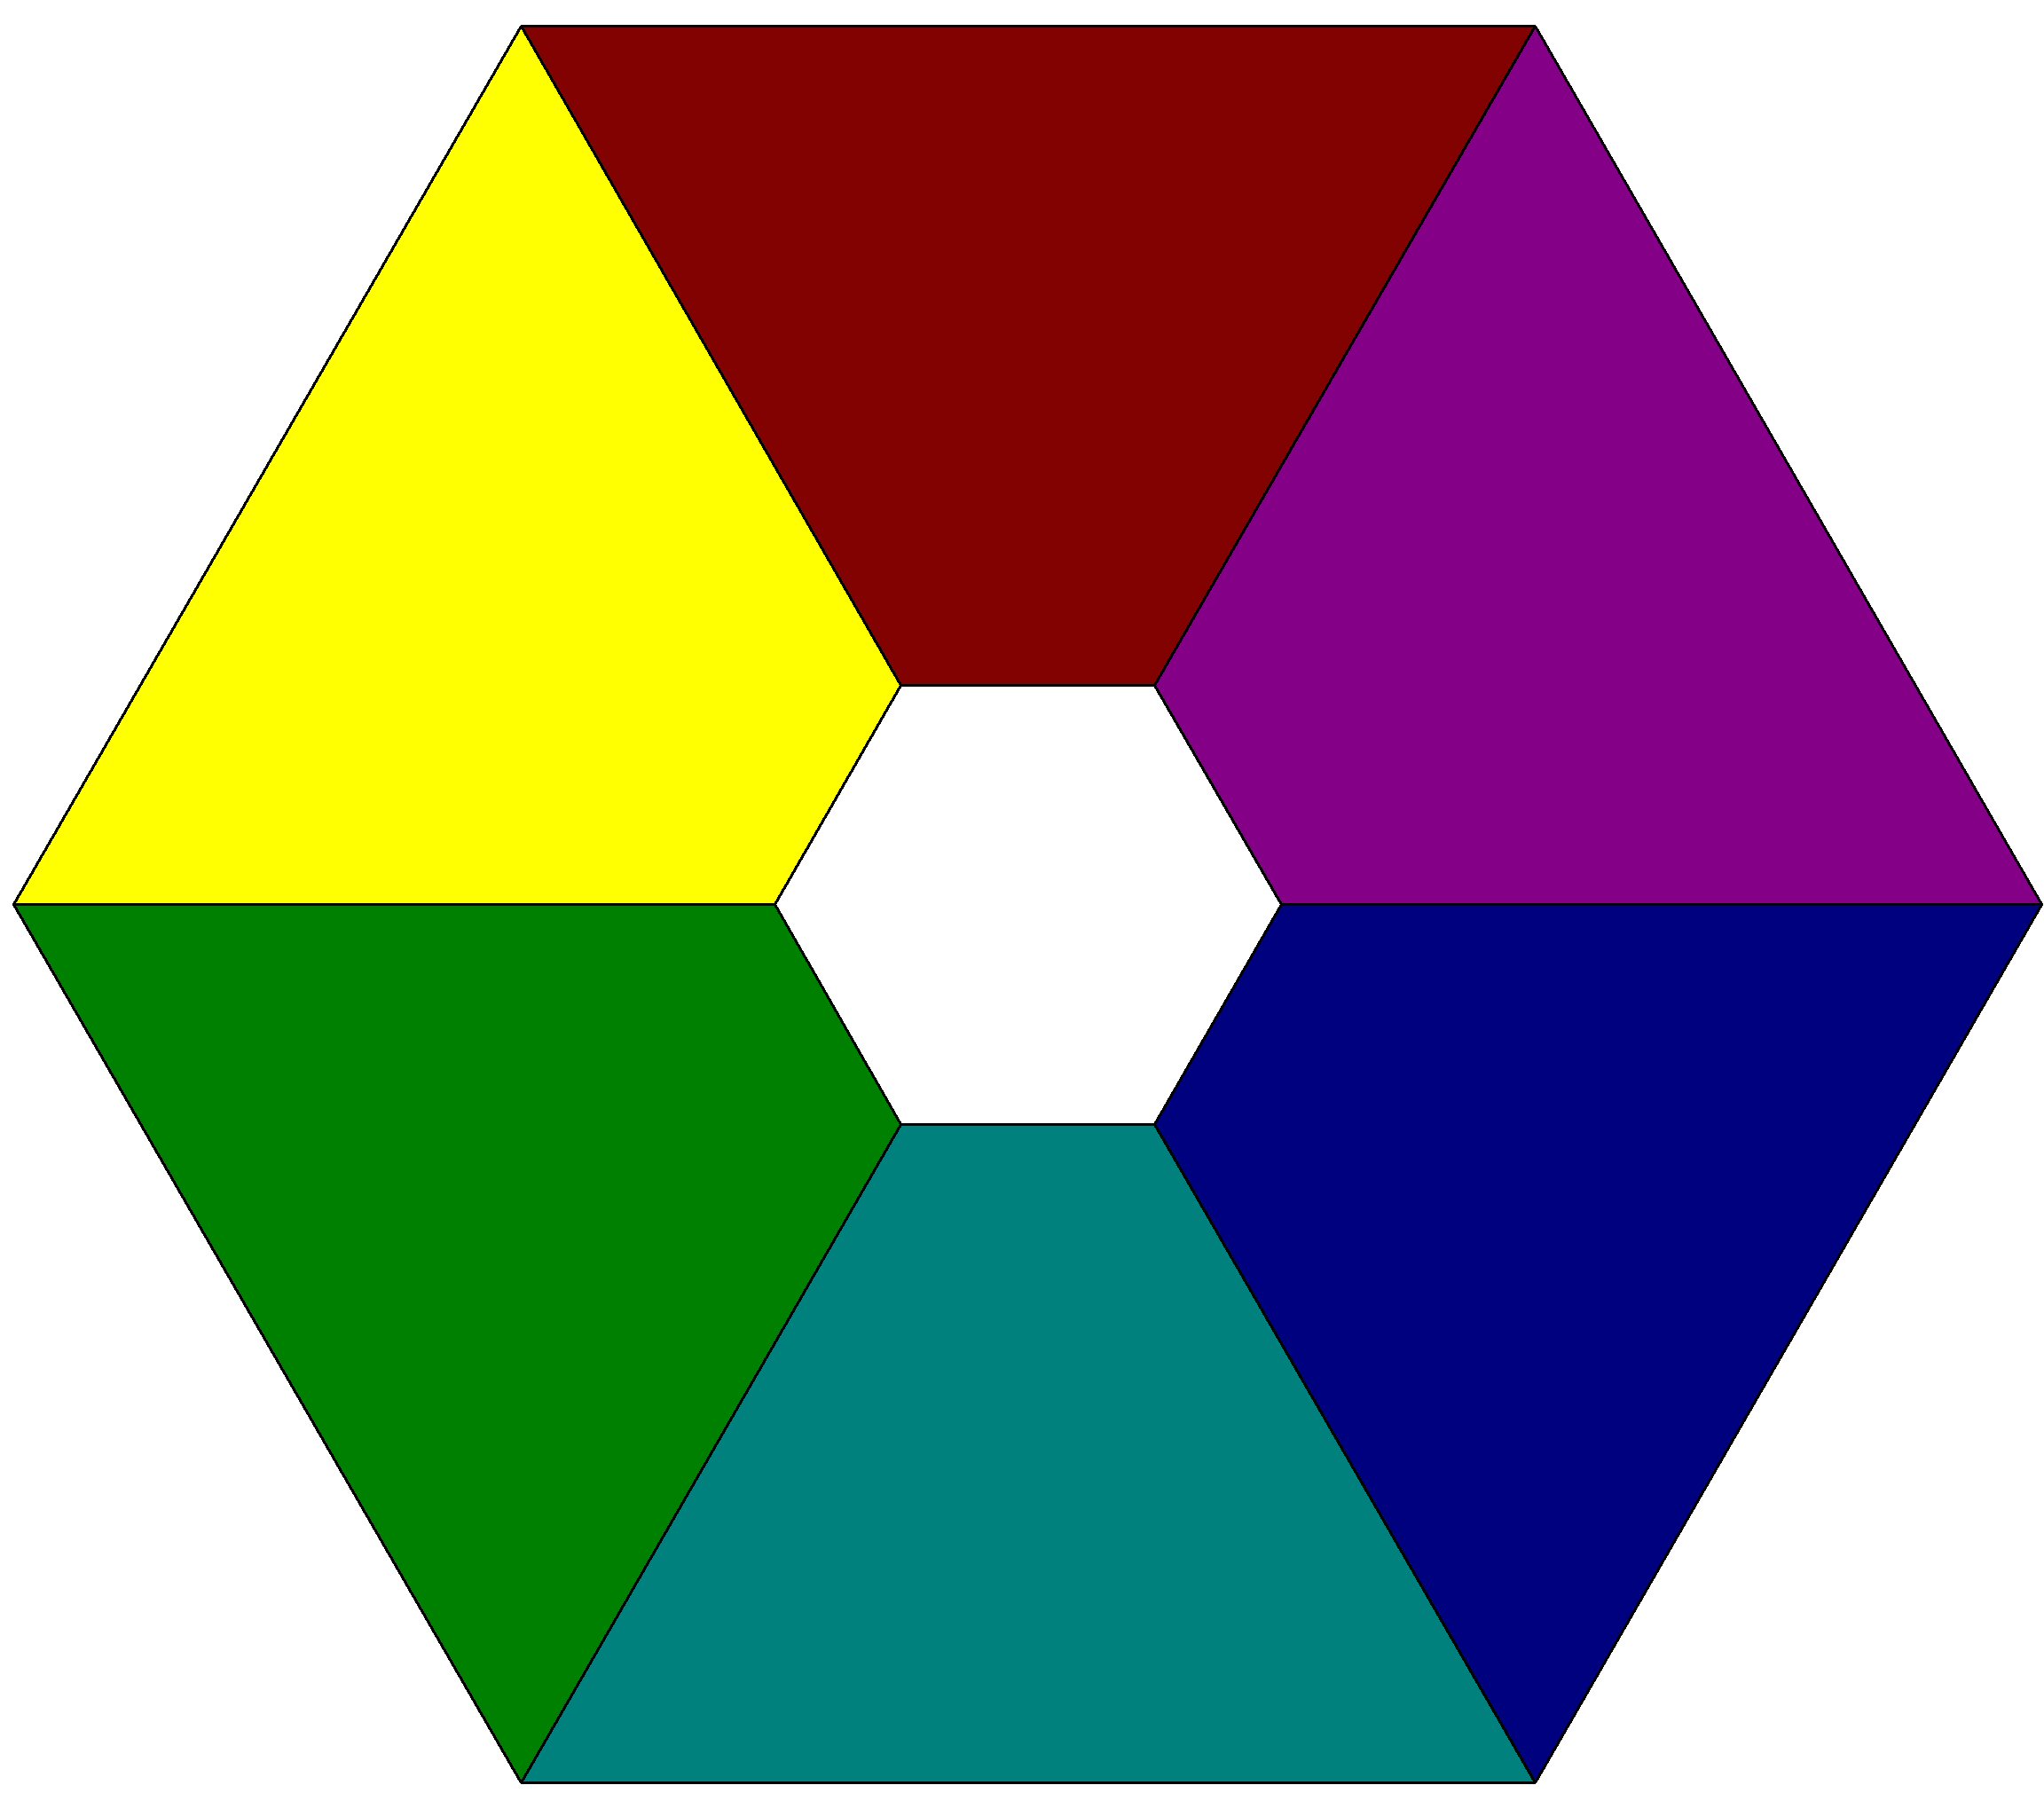 Color Theory for Designers, Part 1: The Meaning of Color